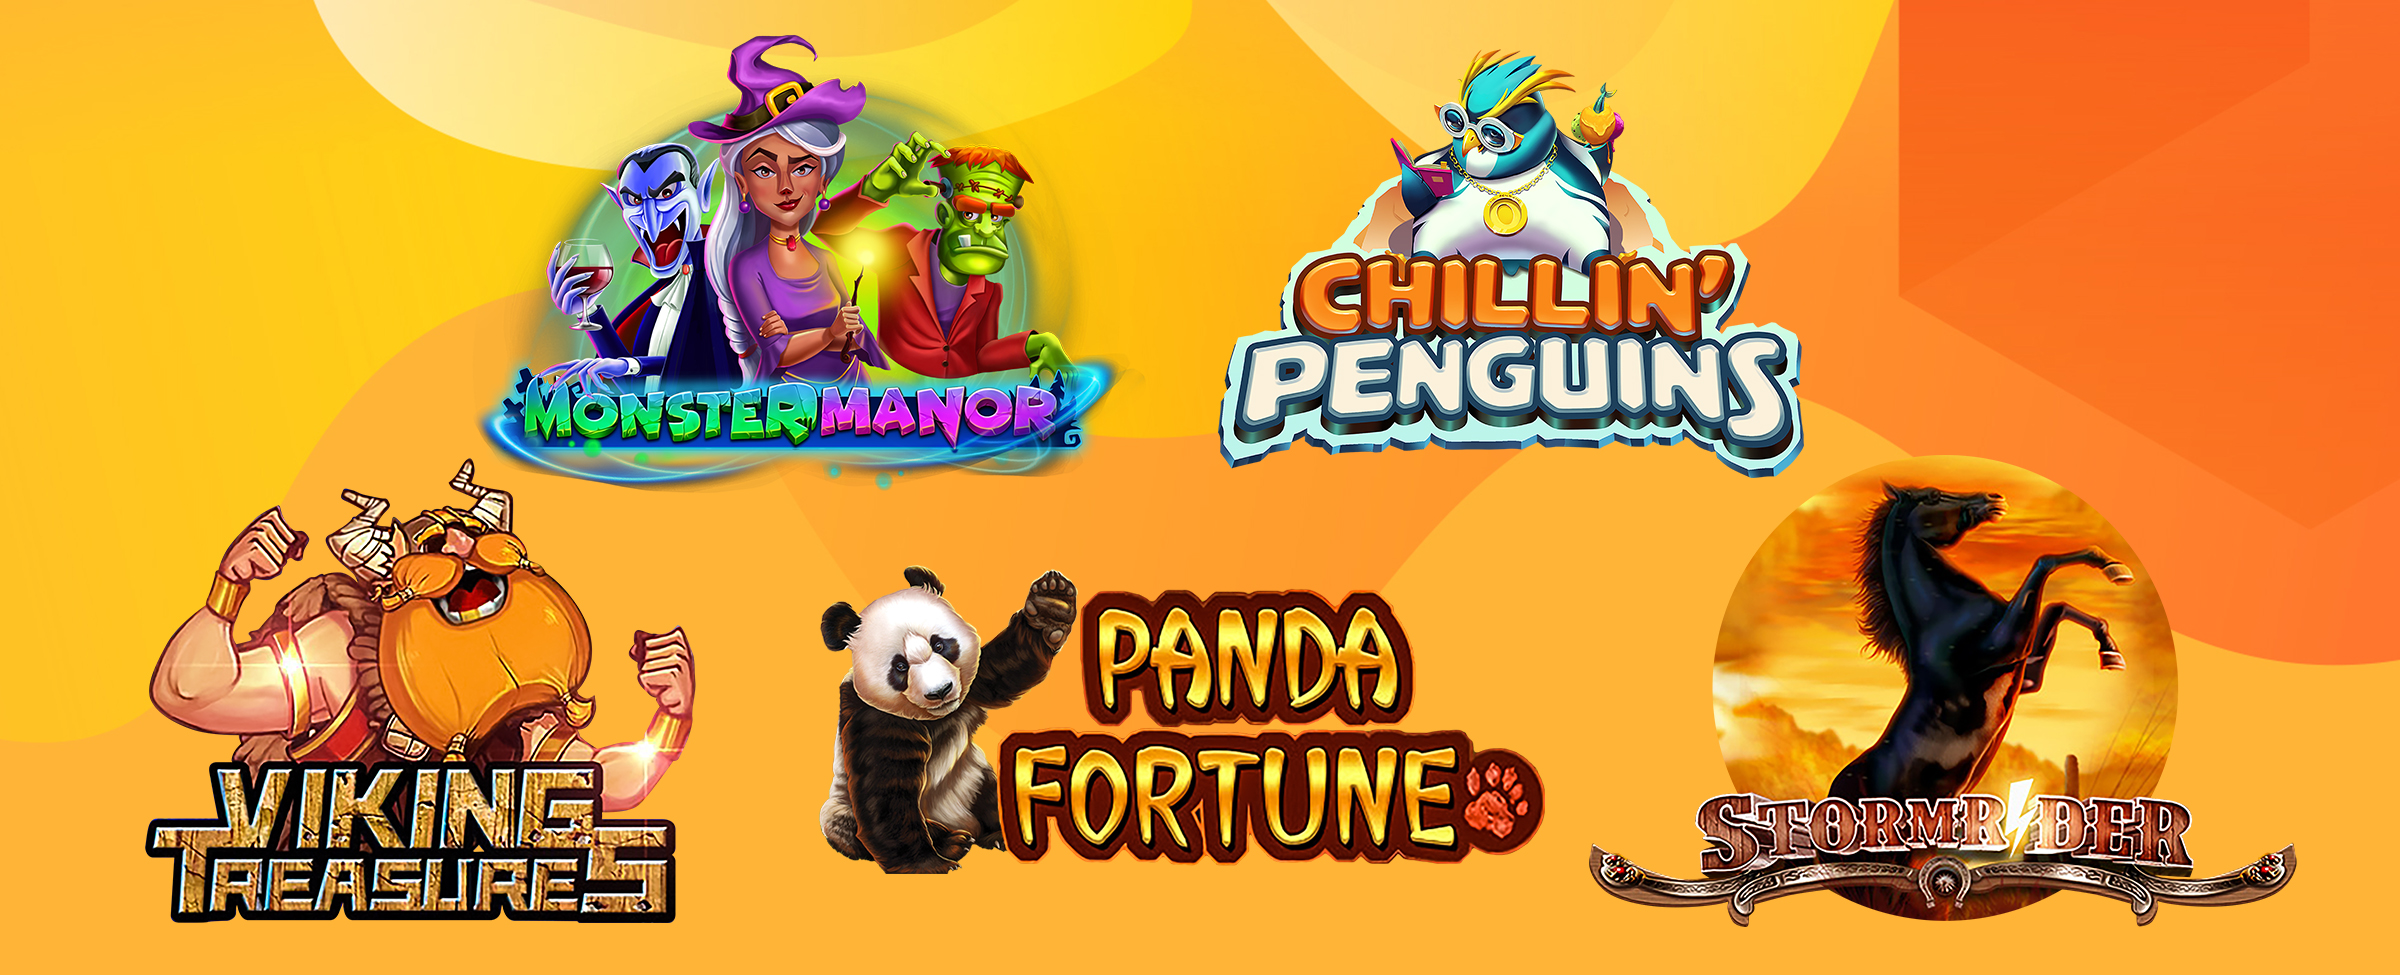 If you haven't heard of these gems, now is the time to introduce yourself! Meet Viking Treasures, Panda Fortune, Chillin' Penguins, Monster Manor and Storm Rider.